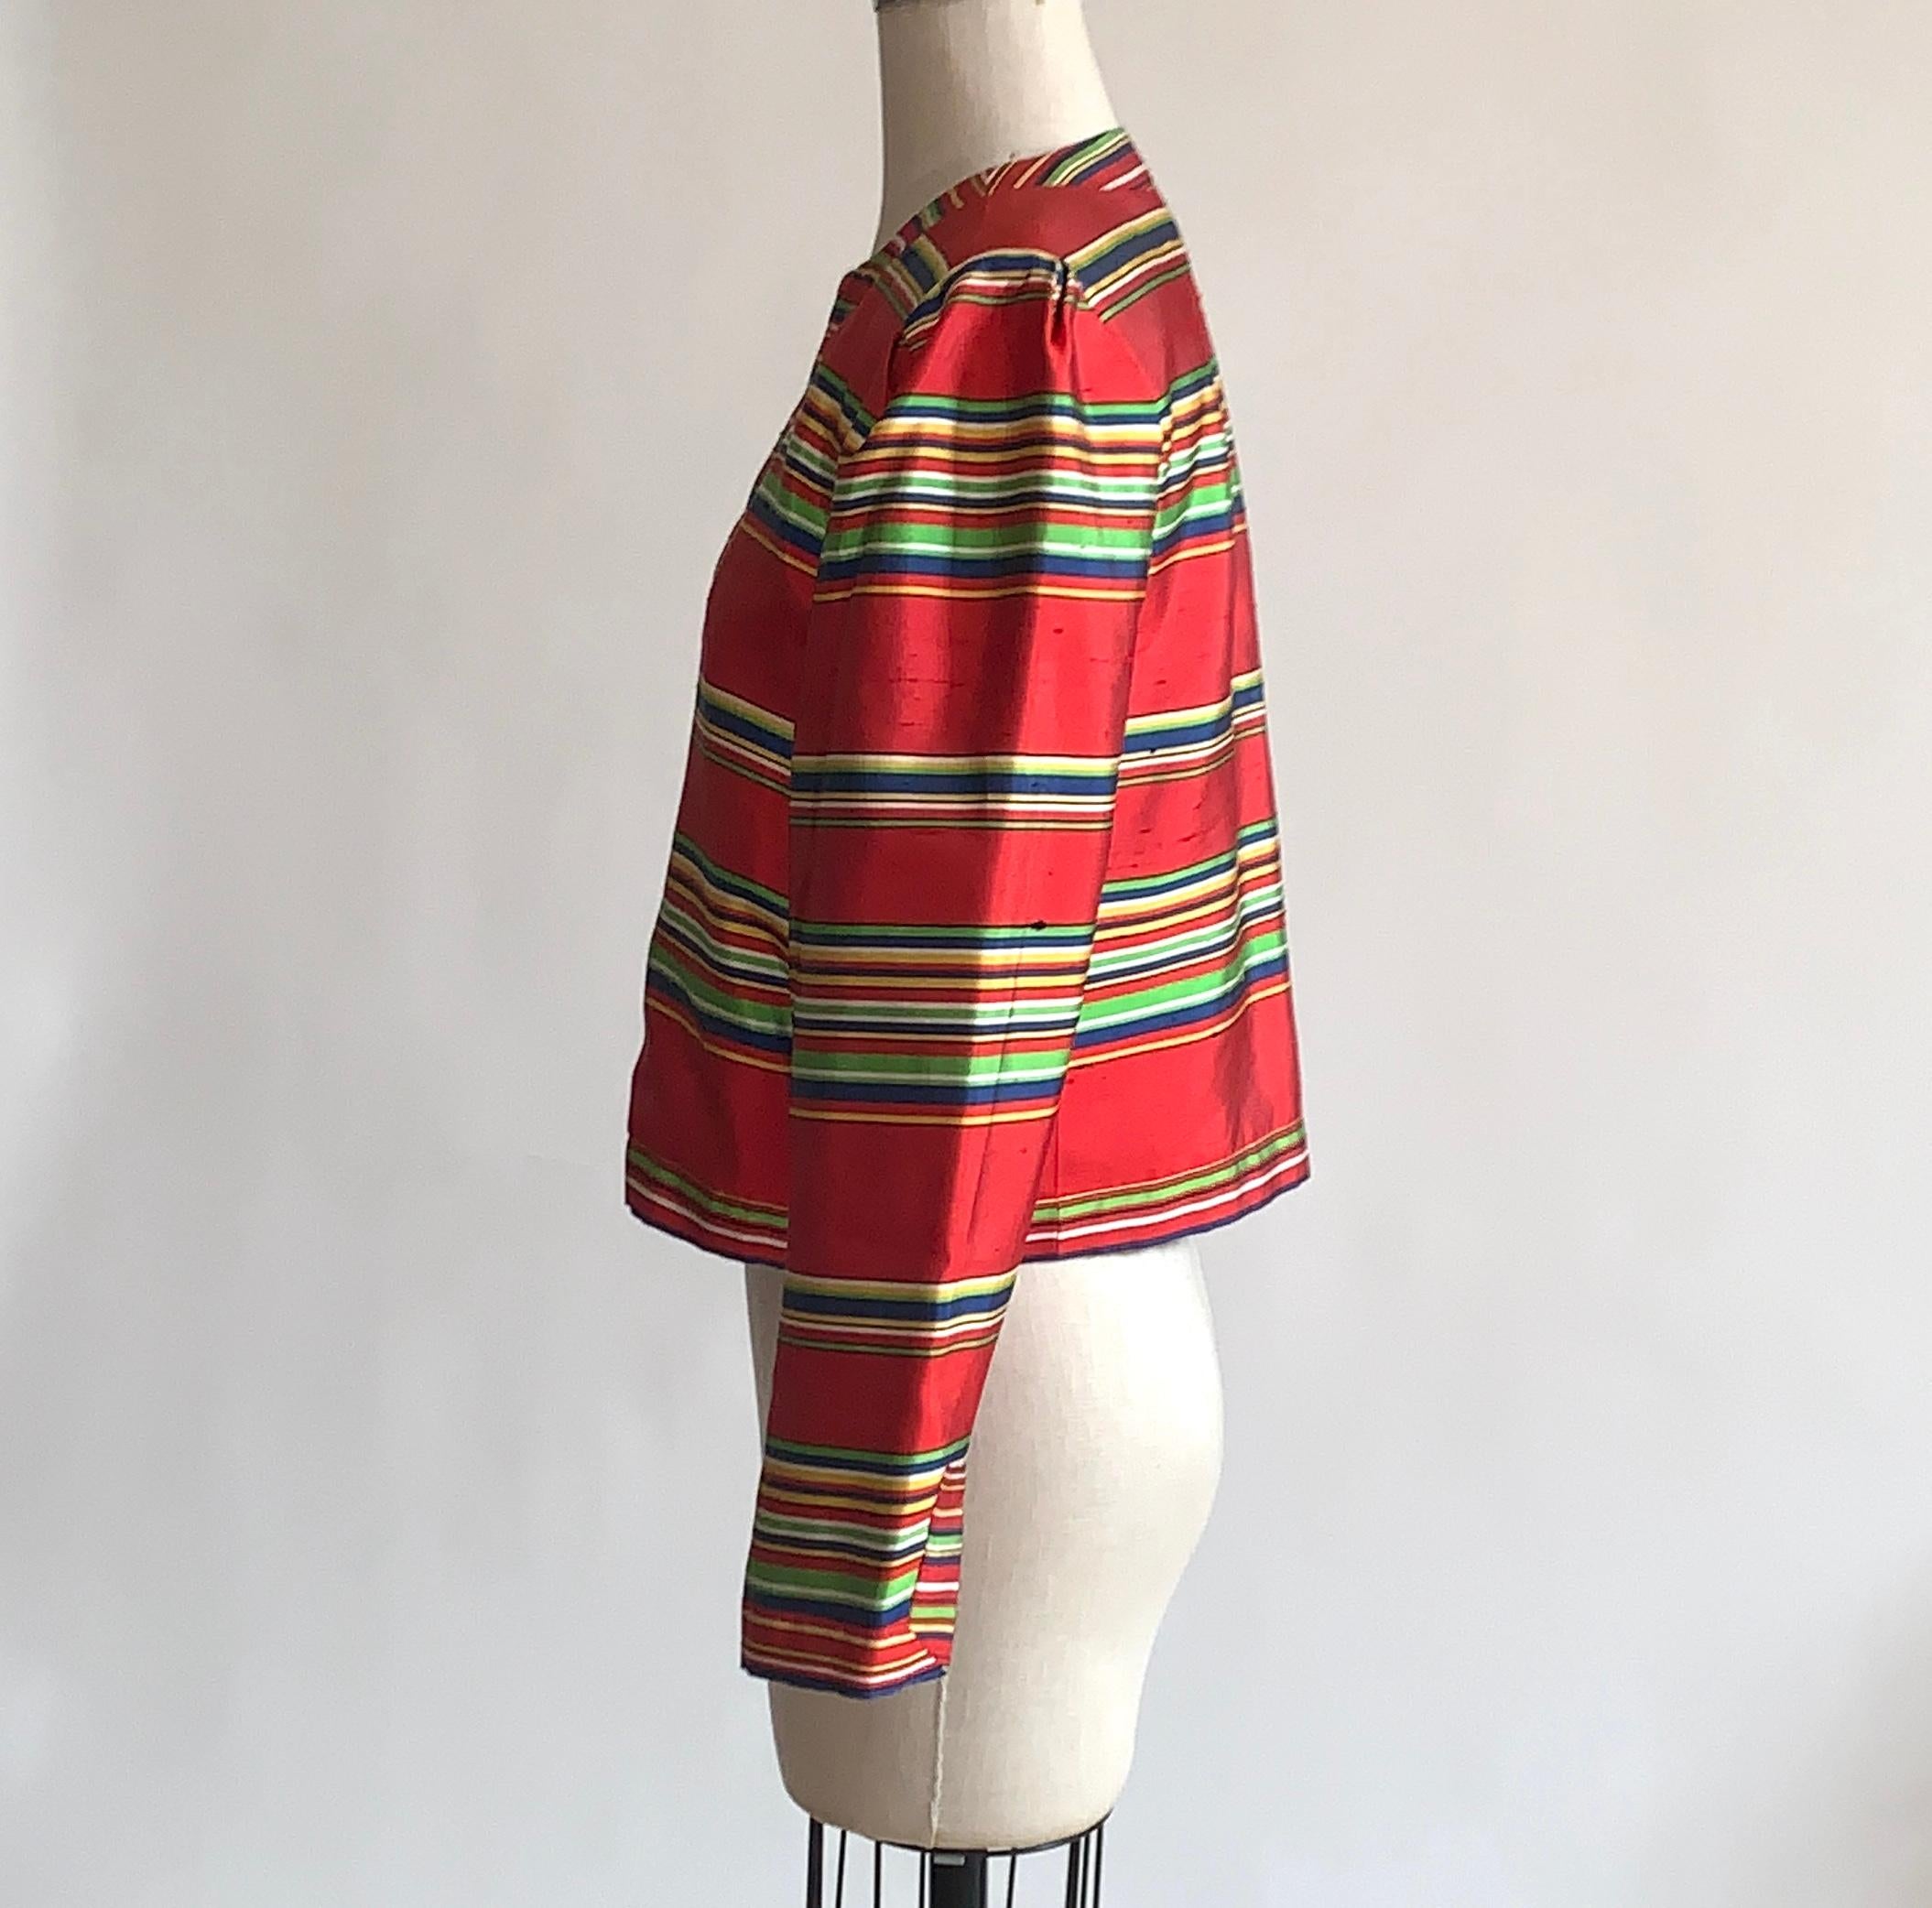 Yves Saint Laurent 1990s Silk Jacket in Red, Green, Blue and Yellow Stripe In Excellent Condition For Sale In San Francisco, CA